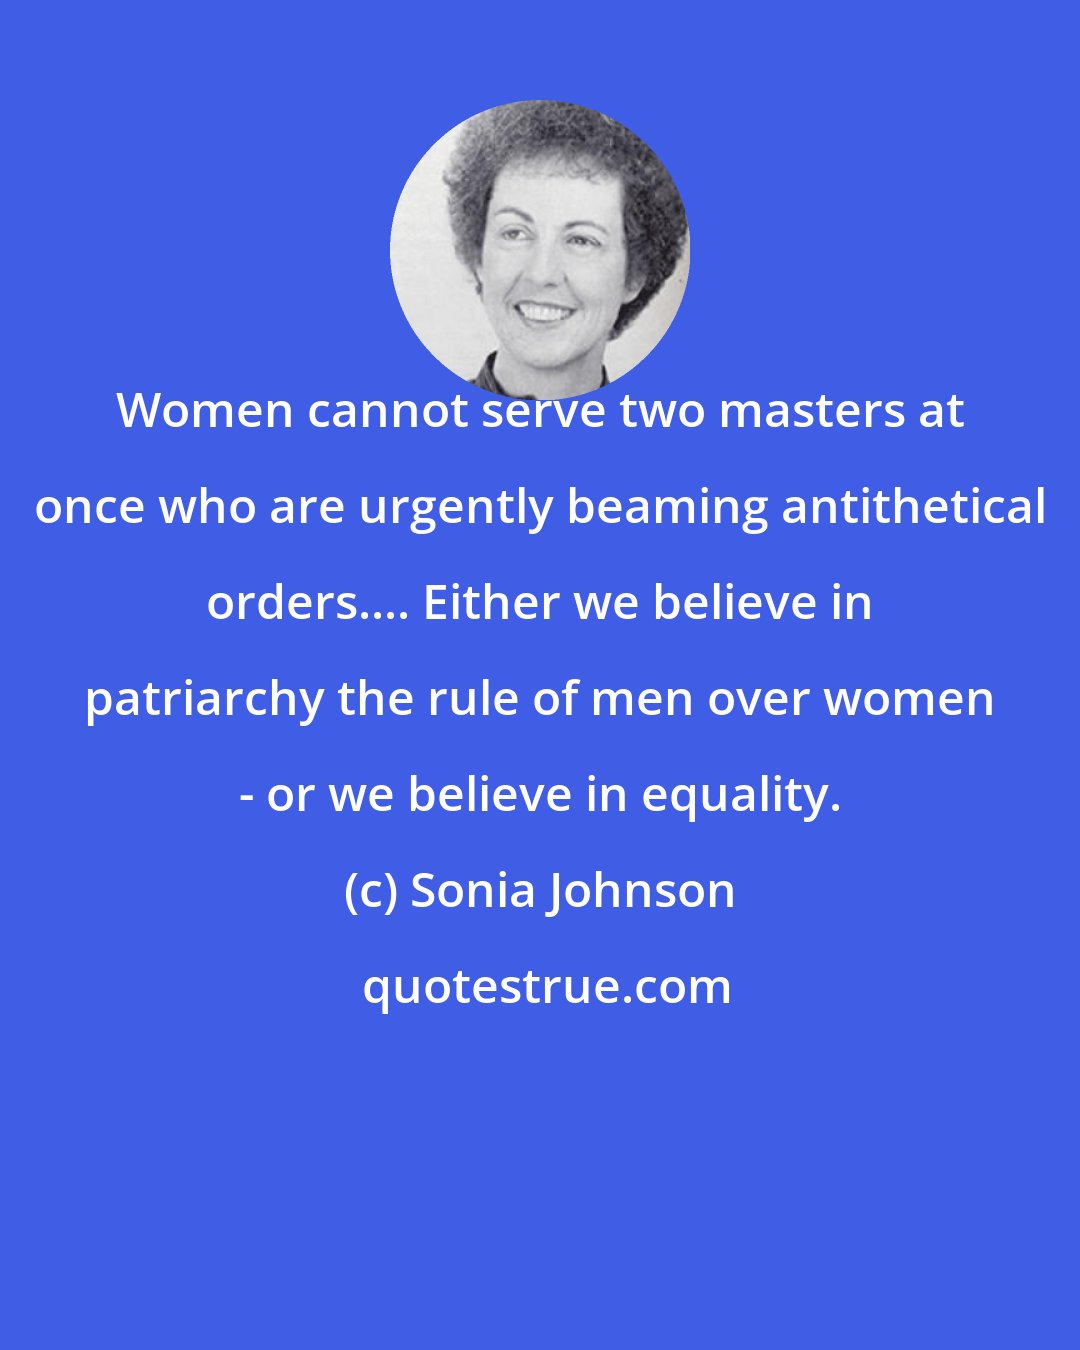 Sonia Johnson: Women cannot serve two masters at once who are urgently beaming antithetical orders.... Either we believe in patriarchy the rule of men over women - or we believe in equality.